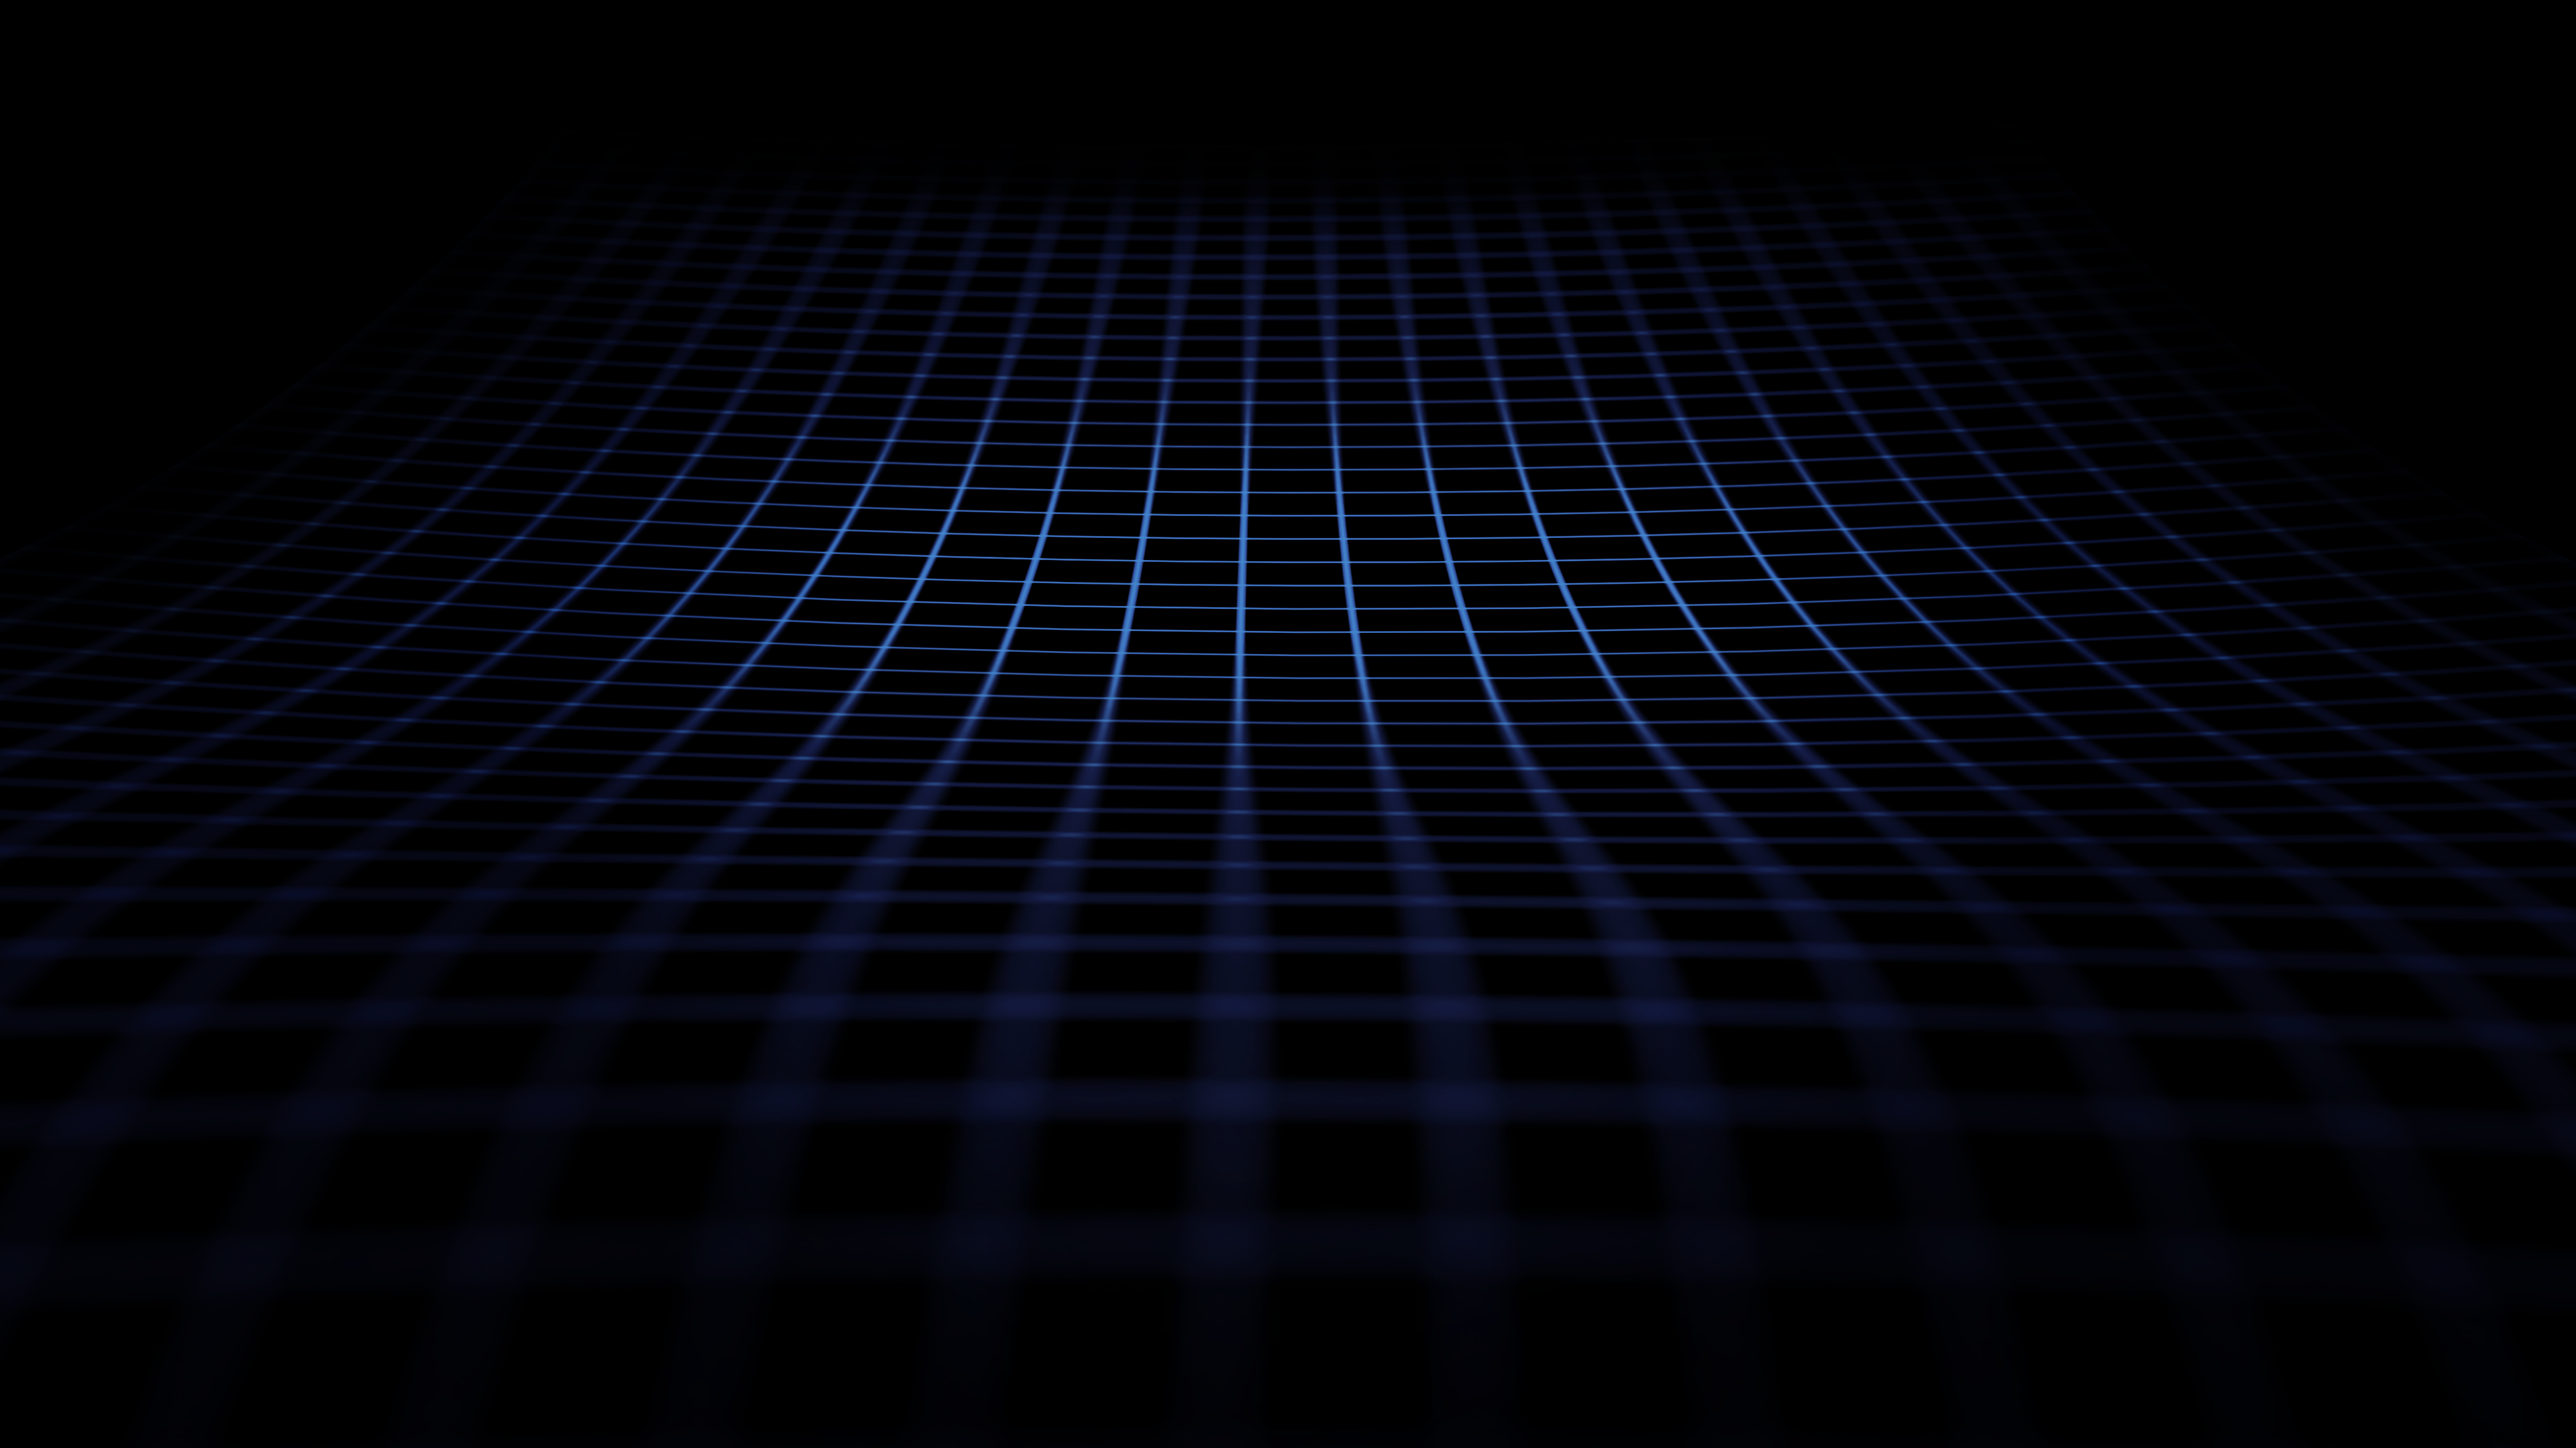 3D Abstract Grid Lines Minimalism Black Background OmarLuna Waves Abstract Digital Art Low Light 4098x2304